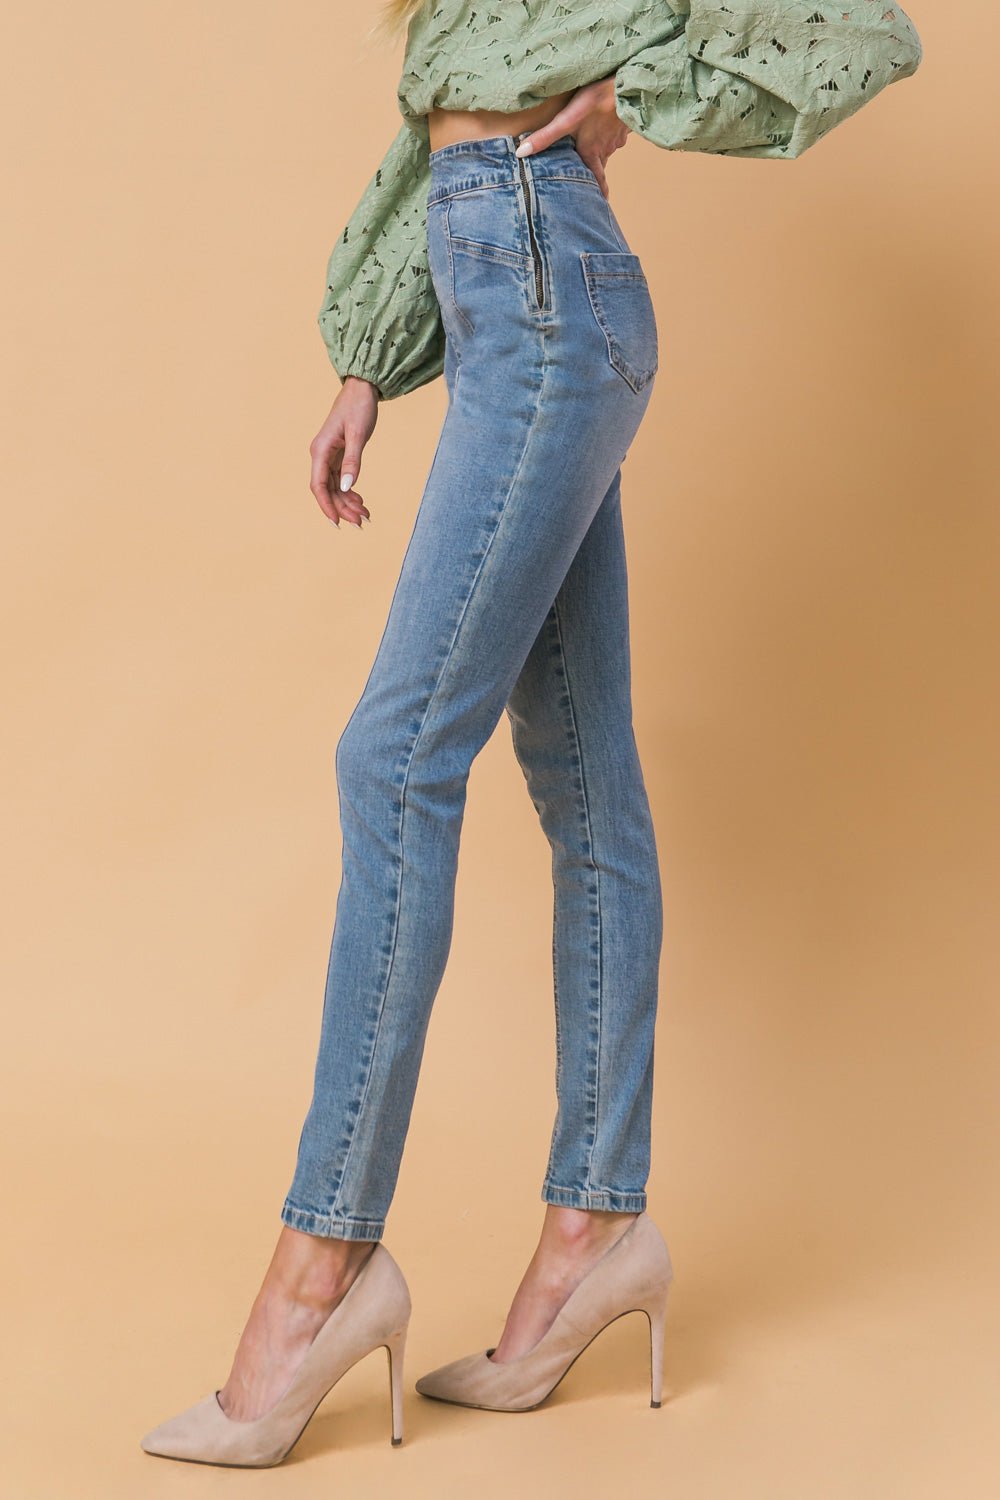 LUCKY STARS LIGHT WASH HIGH WAISTED SKINNY JEANS